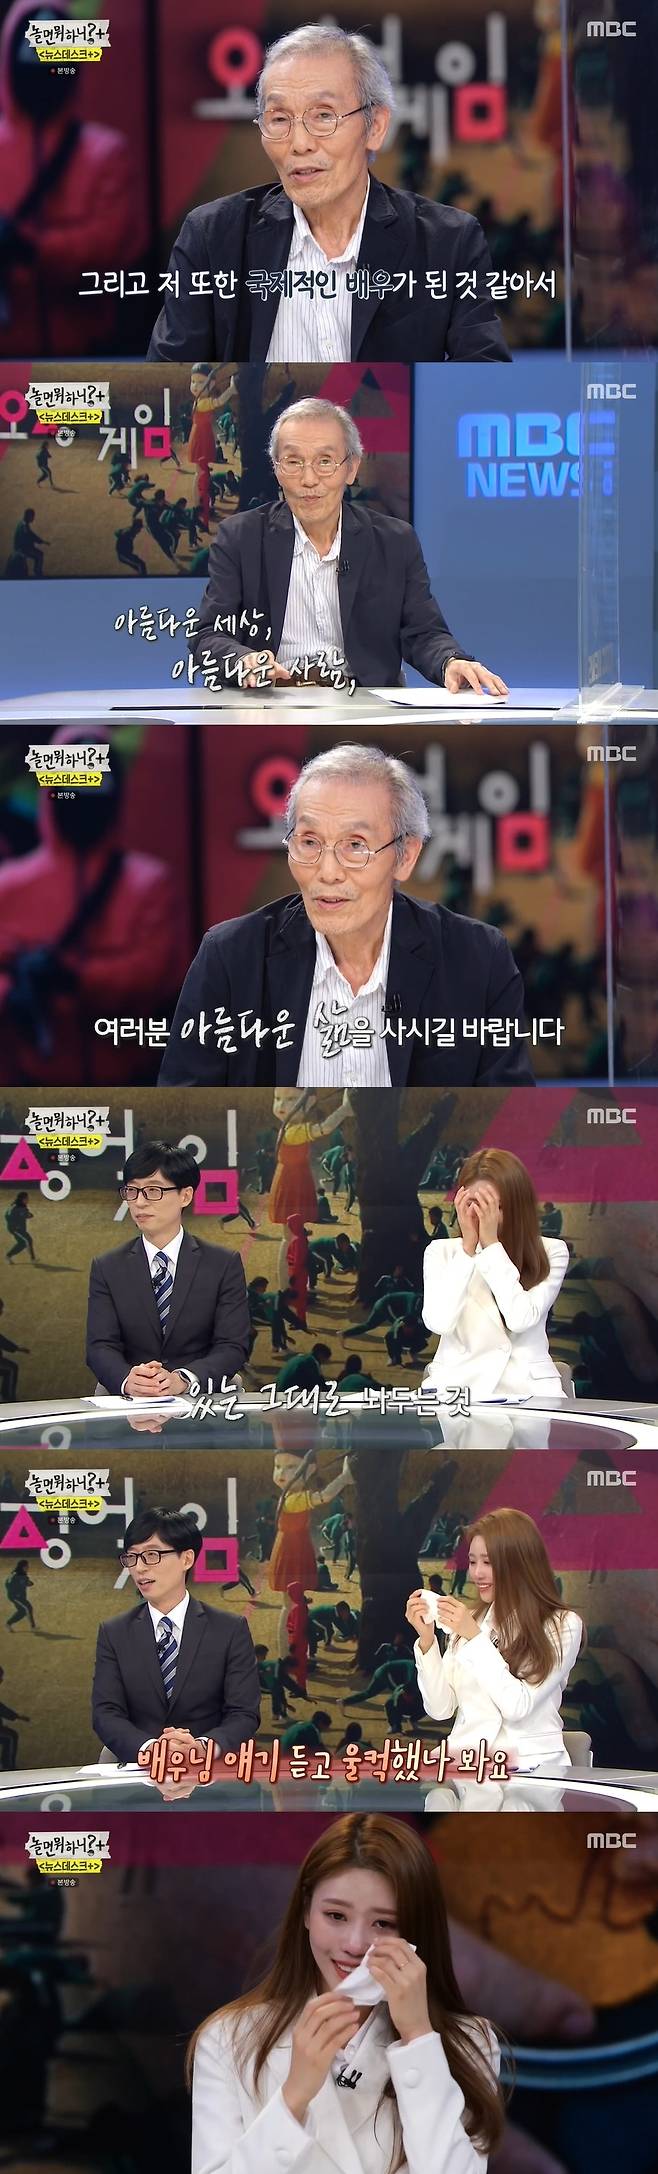 SeoulHangout with Yoo was impressed by the interview of actor Oh Young-soo, who is the main character of the popular drama Squid Game.On MBC Hangout with Yoo broadcasted on the 16th, the appearance of Yoo Jae-Suk Jin Jun-ha Haha Shin Bong-sun beauty was drawn in MBC Newsdesk + coverage.Earlier, Yoo Jae-Suk said he would cover for items about whether welfare for the silver generation is good in the digital age.Yoo Jae-Suk went to the movie theater and went on a key Ossk experience. Yoo Jae-Suk said, I will give up watching movies when it is not easy to pay for movie tickets during the pre-sale process.Then, in the second attempt, Yoo Jae-Suk went to the press, asking the elderly who came to the movie theater to experience the key Ossk.He also challenged the issuance of resident registration copies through Key Ossk.Jeong Jun-ha Haha continued to cover the dance craze.They met dance academy students and succeeded in video interview with Mnet Street Woman Fighter Monica, the main character of dance craze.Dance craze is not a joke, do you feel it with your body, he asked in a video interview with Monica, who said, I feel it very much.I went to a shop a while ago, but I could not buy the goods while taking pictures. What do you think the challenge is trendy these days? asked Haha, who said, At first, dancers did not welcome it.I practiced dancing for a long time, he said. But after a while, I was watching the dancers enjoying the dance.Im trying to study what I can easily show dance. Finally, Haha asked, What is good about learning dance? I was mentally stable, Monica said. I was helpless in high school. When I danced, my life became healthy.Shin Bong-sun Americas then covered the Lanson blind date item.The Americas said, Blind date is the first time, and Shin Bong-sun said, I did it twice, but it did not fit.The Americas asked, Do not you have an afterta? And Shin Bong-sun said, I do not mean to say so.Later, the Americas said, If you like it, I will touch your ears. As soon as the blind date began, the Americas immediately touched their ears.The Americas asked the blind datenam, Did you know that I was coming to the blind date? And the blind datenam replied, I did not know it at all, but I know it because it is so famous.I am making a cell phone, I am a researcher, said Blind Datenam, who said, I am a researcher. When asked about the beauty of What are you doing with the rest day?I like dogs so much that I take a walk, the Americas said. I will not be bad if I take a walk together.Ill recognize the course, Blind Datenam said, stirring up the Americas.Blind datenam and the Americas talked about where they lived and hobbies. When Blind datenam said he liked badminton, he worried about how about a woman who does not like exercise.Then blind date Nam said, Do not you have to exercise together?Later, the Americas said, Today is the time after I finish. He asked, When are you free? And actively dashed, Do you send a direct message?He added, Ill wait. He added, Is this the end? Go out first, I can not press out.So blind date Nam went out first, and the Americas said, I am going out, really, do not look back?After the blind date, the Americas was excited, saying, I honestly loved you. I threw a stone in a calm river.The next order was Shin Bong-suns turn.Shin Bong-sun was seen heart-throbbing at his visuals as the Pilates instructor and musical actor blind date and blind date began.Blind date Nam formed an atmosphere of excitement by writing anti-respectful comments and attracted attention by solving the conversation skillfully.They also formed a consensus on travel, and they were saddened to break up. Shin Bong-sun said on the paper, Will you contact me?, and the blind datenam responded, yes! ; afterwards Shin Bong-sun said, I was sweating on my pants. In MBC Newsdesk, a report was released that they covered; as a special guest, Oh Young-soo, the lead character of the Netflix popular series Squid Game, appeared.Oh Young-soo was loved by the 001 participant Oh Nam-nam, who is called Grandpa of Kanbu.58-year-old actor Oh Young-soo shook hands as soon as he met Yoo Jae-Suk and welcomed him as a man I like. He said he was the first to appear on the show.I have had so many contacts, but there is no one to help me, so I can not handle it alone, so my daughter is helping me.Oh Young-soo said of his colleagues reaction: Theres a caller because Im injured. Park Jeong-ja also came and a few people came.I feel like I am a world star. When asked how the syndrome feels, he replied, I feel like I am feeling a little bit awake and now I have to be self-reliant.Oh Young-soo asked if everyday has changed, adding: It has changed.I felt that I had to be conscious even if I went to a cafe or a place like this and that it was hard to be famous., and laughed, answering, Of course.How did you see the scenario for the first time? I participated in the idea of ​​director Hwang Dong-hyuk, who finds social absurdities through the symbolism of the play called Squid Game.I had to do it at once, he said. I had an offer at the movie Namhansanseong , but I could not participate because I had a job.I was always sorry, but I was actively involved in this visit. Oh Young-soo said in an interview that Lee Jung-jae was a senior who has a young idea. There is a saying: When Age comes, passion disappears.I do not think I am like that. When I lose my passion and Age, it happens. I was young and I was young, he said at the time of shooting. I pretended to be a little overly young because I was going to exist in it.Thats because I wonder if it will be in common with young friends. Ive heard the secret to fitness. Oh Young-soo said, Im parallel rods. Ive been in my teens for 60 years. I still do 50 times a day.I saw that there was no parallel rod in the neighborhood. I am a companion of life. The most memorable scene in the squid game is a scene of beading, he said. I have a lot of old thoughts and tears.As for the usual personality, he said, Oil is similar to me.He also revealed the occasion when he dreamed of becoming an actor.Oh Young-soo said, At first, I did not have much to do, so Friend went to the theater once and it became a motive. The beginning was funny, but I felt proud as an actor when I felt like I was being pushed to the audience when I threw something that the times had.I act while thinking about what the end of my life is like. As for those who liked Squid Game, I would like to say, There are times when our society flows as if it is the first or the second place, but the second place was defeated by the first place but won the third place.Everyone is Winners & Losers. If you are a true Winners & Losers, I think it is the person who tries to do what he wants to do and get to a certain place, such as the Winners & Losers.He also said, I do not have any special worries and should be concerned.It is a good thing to live without problems with Family, he said. It is a desire to live if you expect it.He also said, I have been receiving a lot of greedy guides, whether it is small or big. I want to leave everything I have received now.For example, if youve got flowers in the mountains, youve broken them when youre young. Ill leave them at my Age. Go back.Its not easy to leave it as it is, he said.I think the anchor of the immigration has been shaken, said Yoo Jae-Suk. There is a echo that the teachers tone itself gives.Finally, Oh Young-soo said, I think that Squid Game has become a global topic and I think it is meaningful. I also feel like I have become an international actor.The favorite word among our words is beautiful: a beautiful world, a beautiful person, a beautiful society. He said, I came here today and met two beautiful people in a beautiful space and had a beautiful time. I hope you will live a beautiful life.